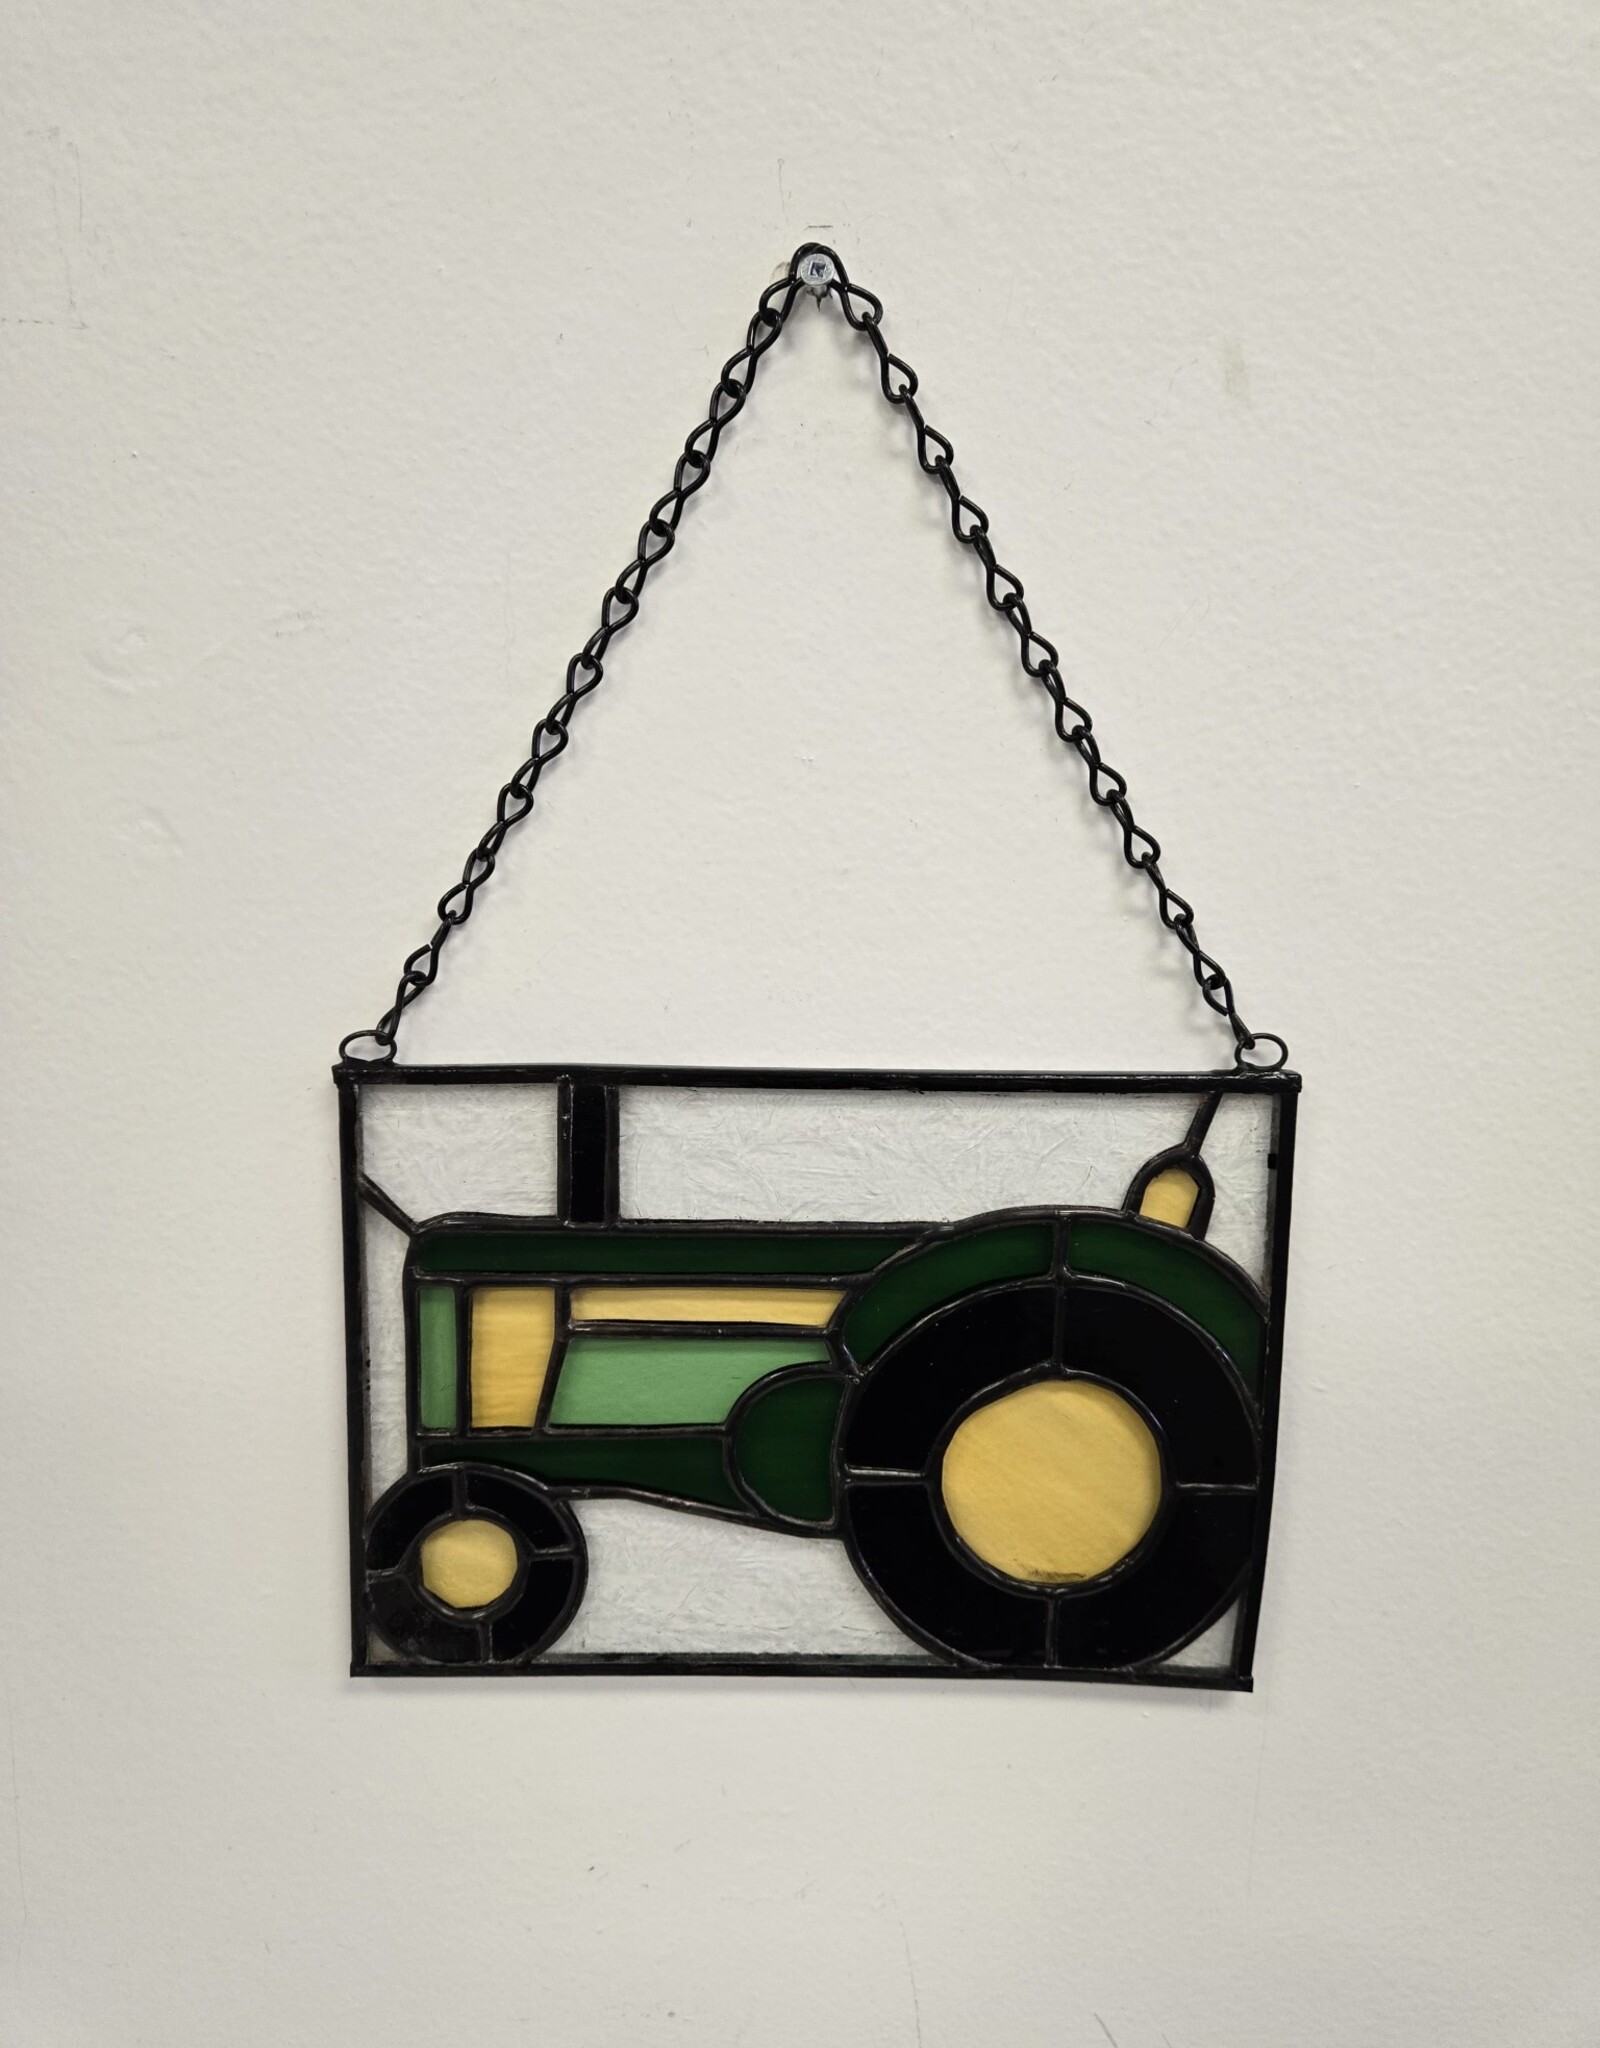 Stained Glass John Deere Tractor - 8" x 5.5"